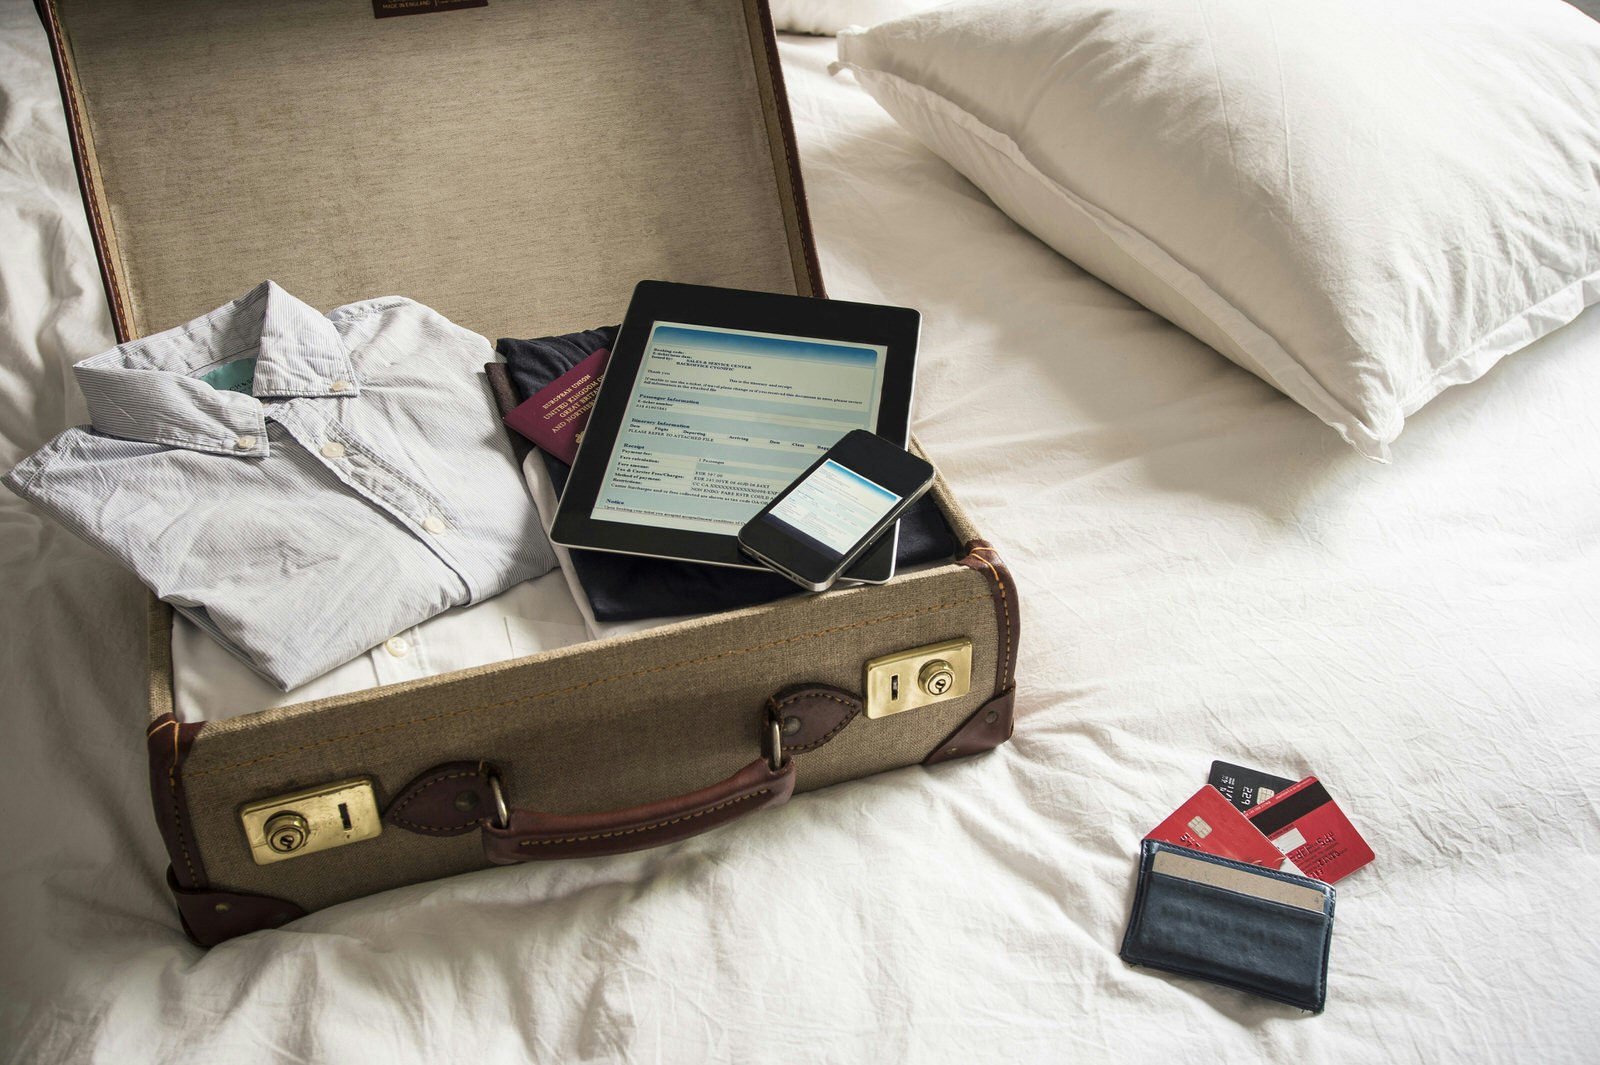 Open suitcase on a bed with a digital tablet and mobile phone.